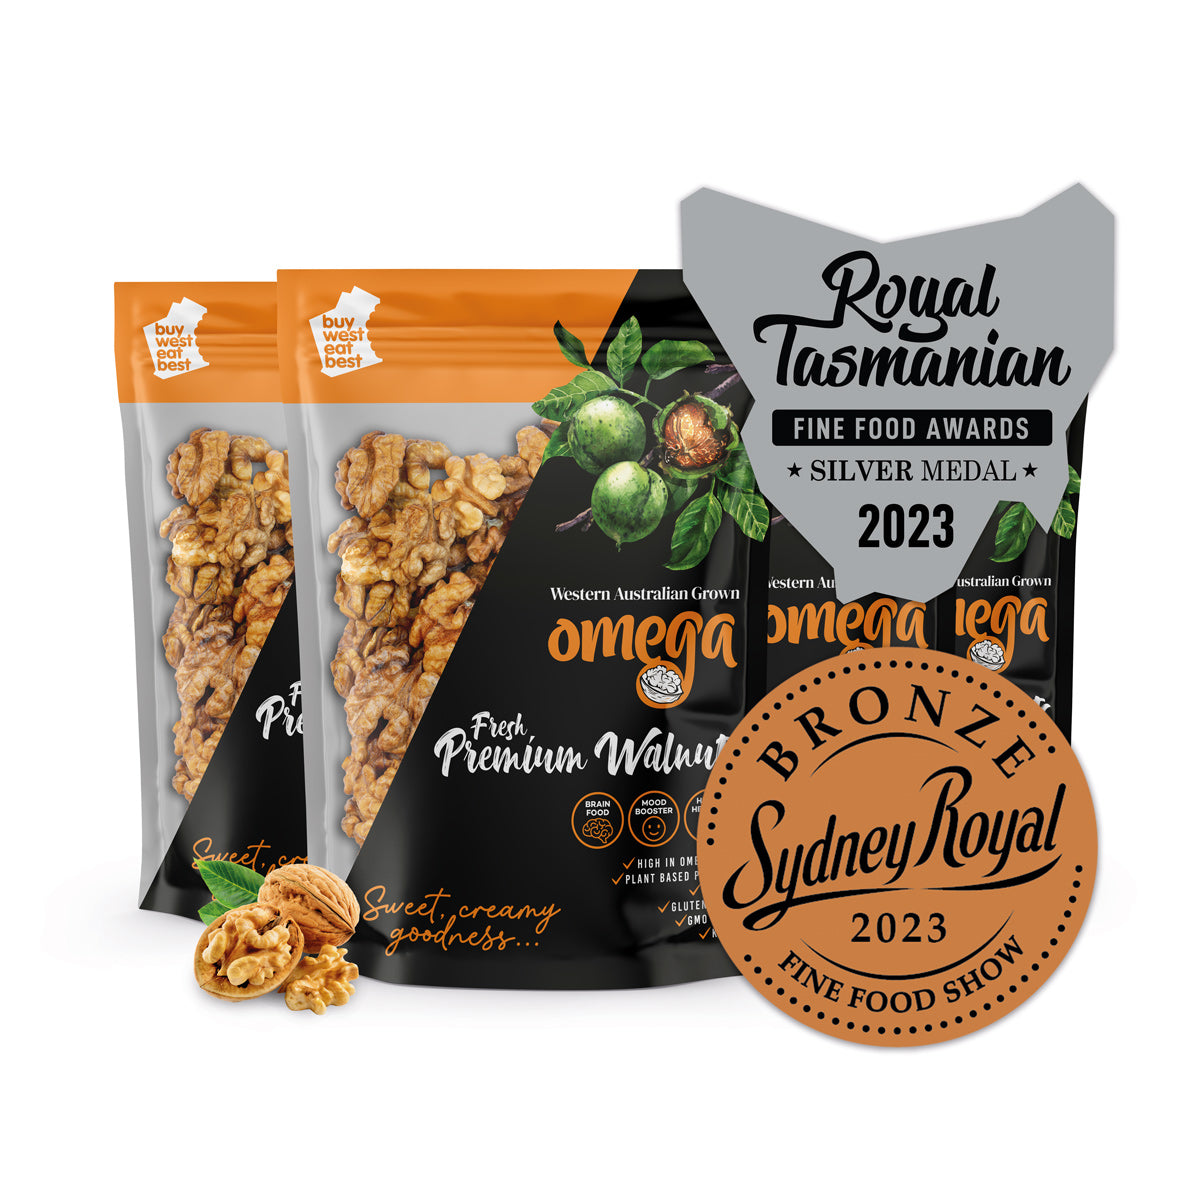 4 x 250g Conventional Shelled Walnuts Pouch Bundle